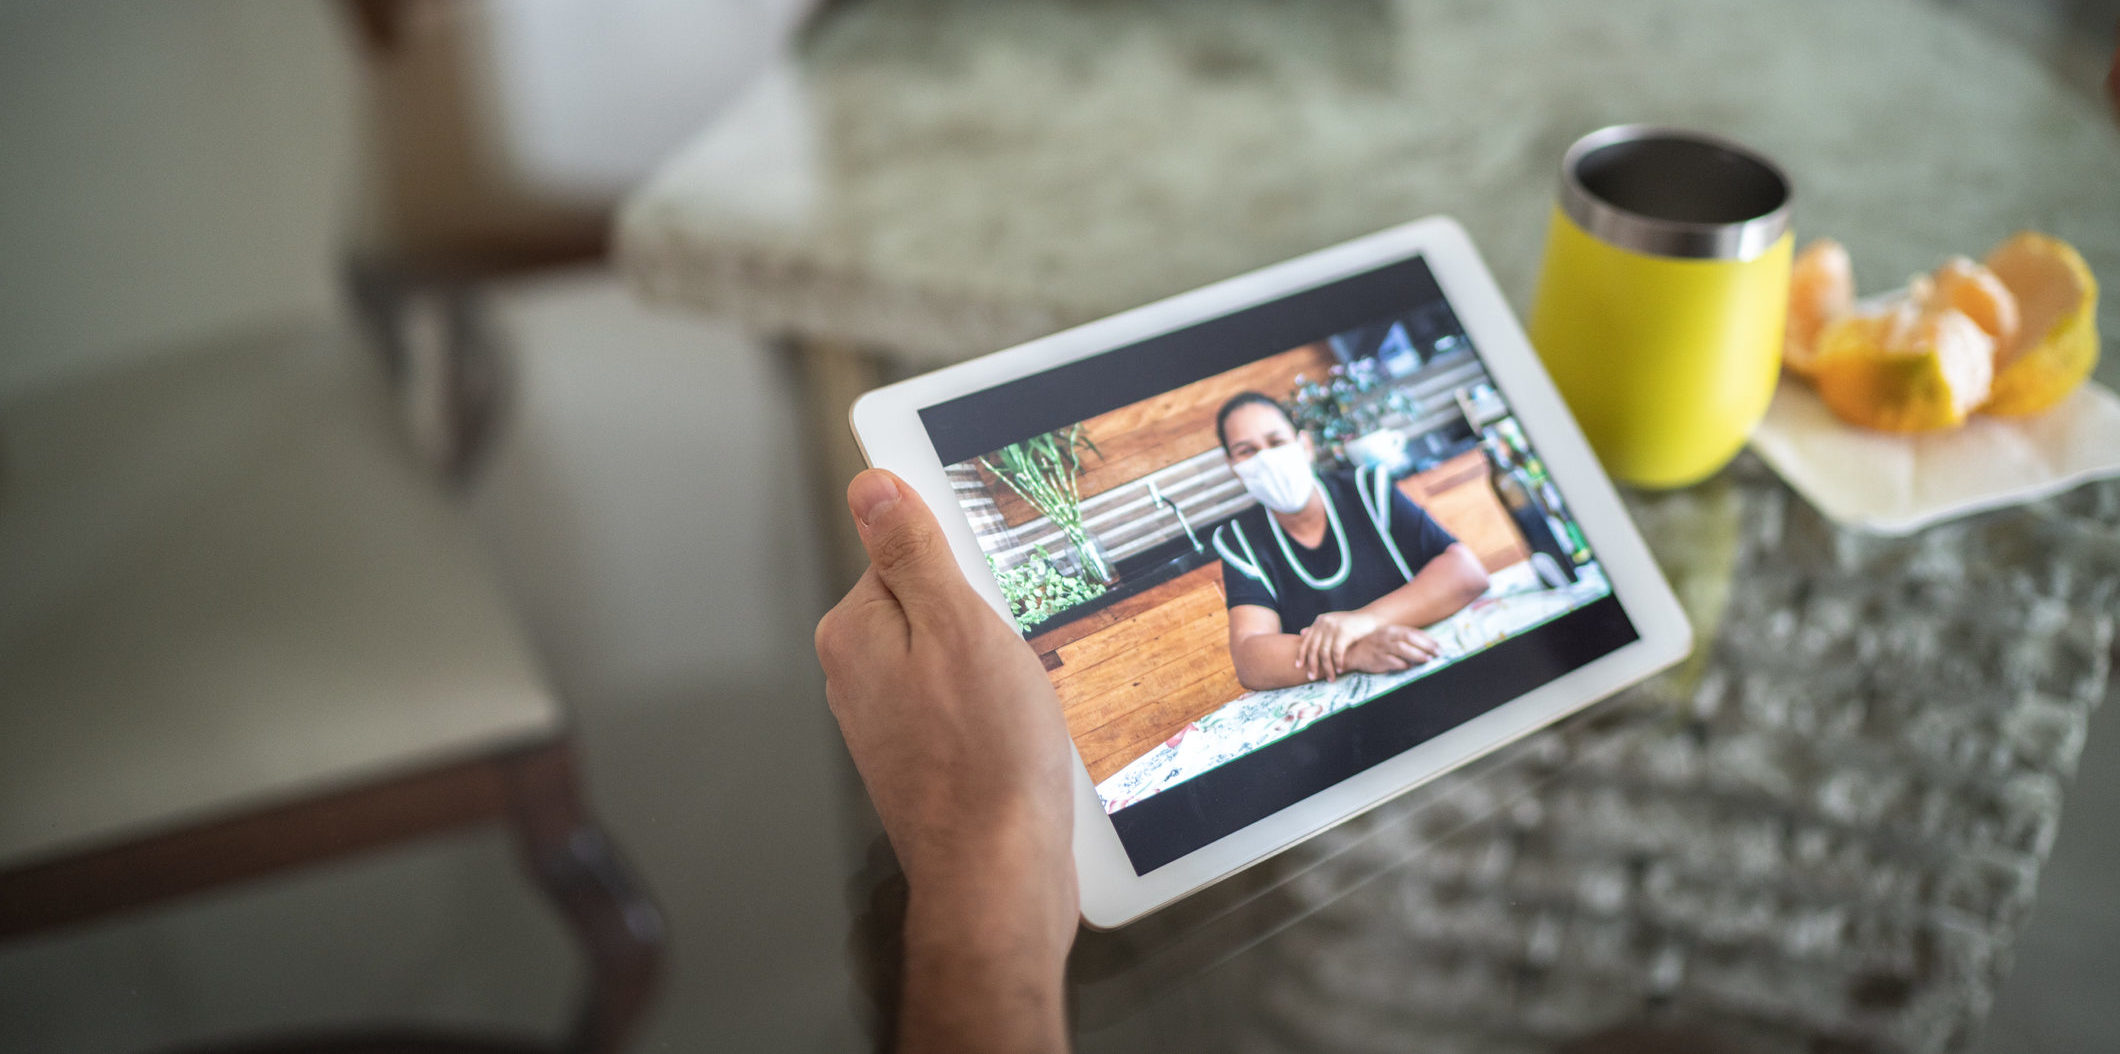 How Healthcare Marketers Can Make Better Use of Video